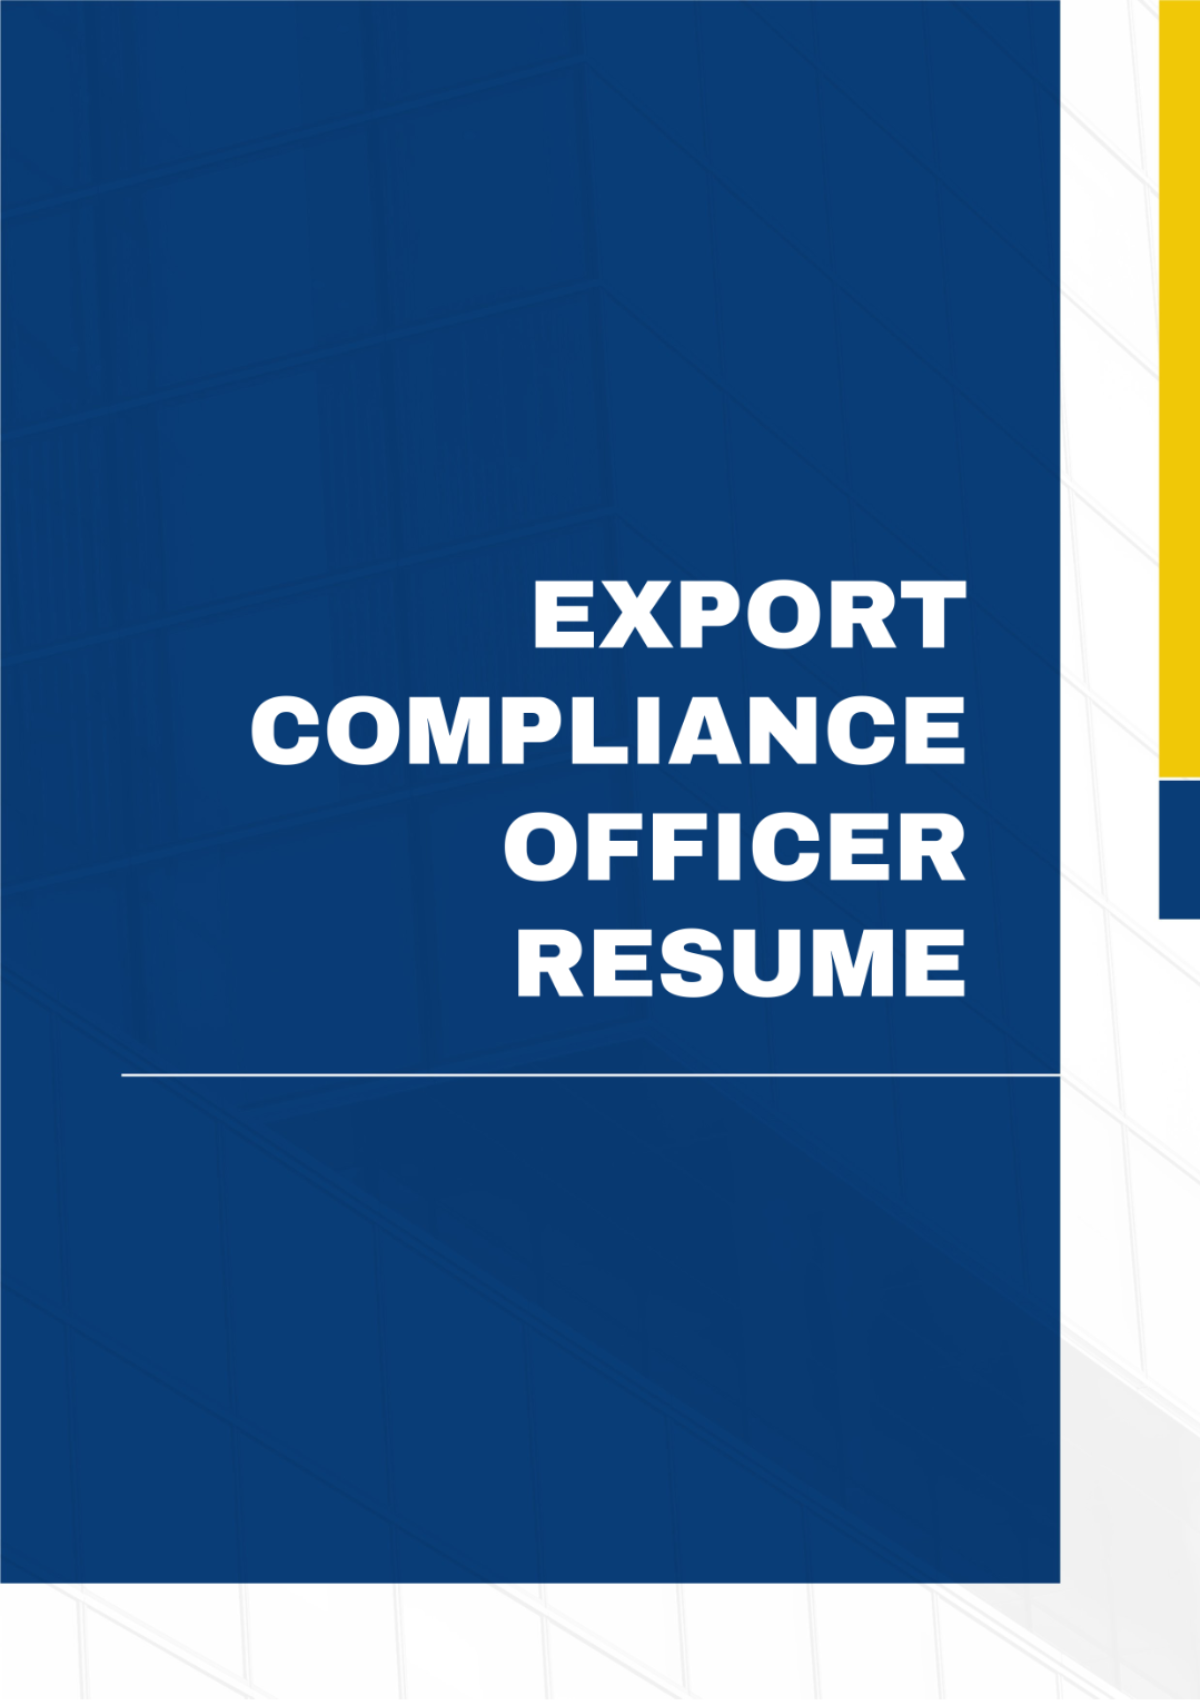 Export Compliance Officer Resume Template